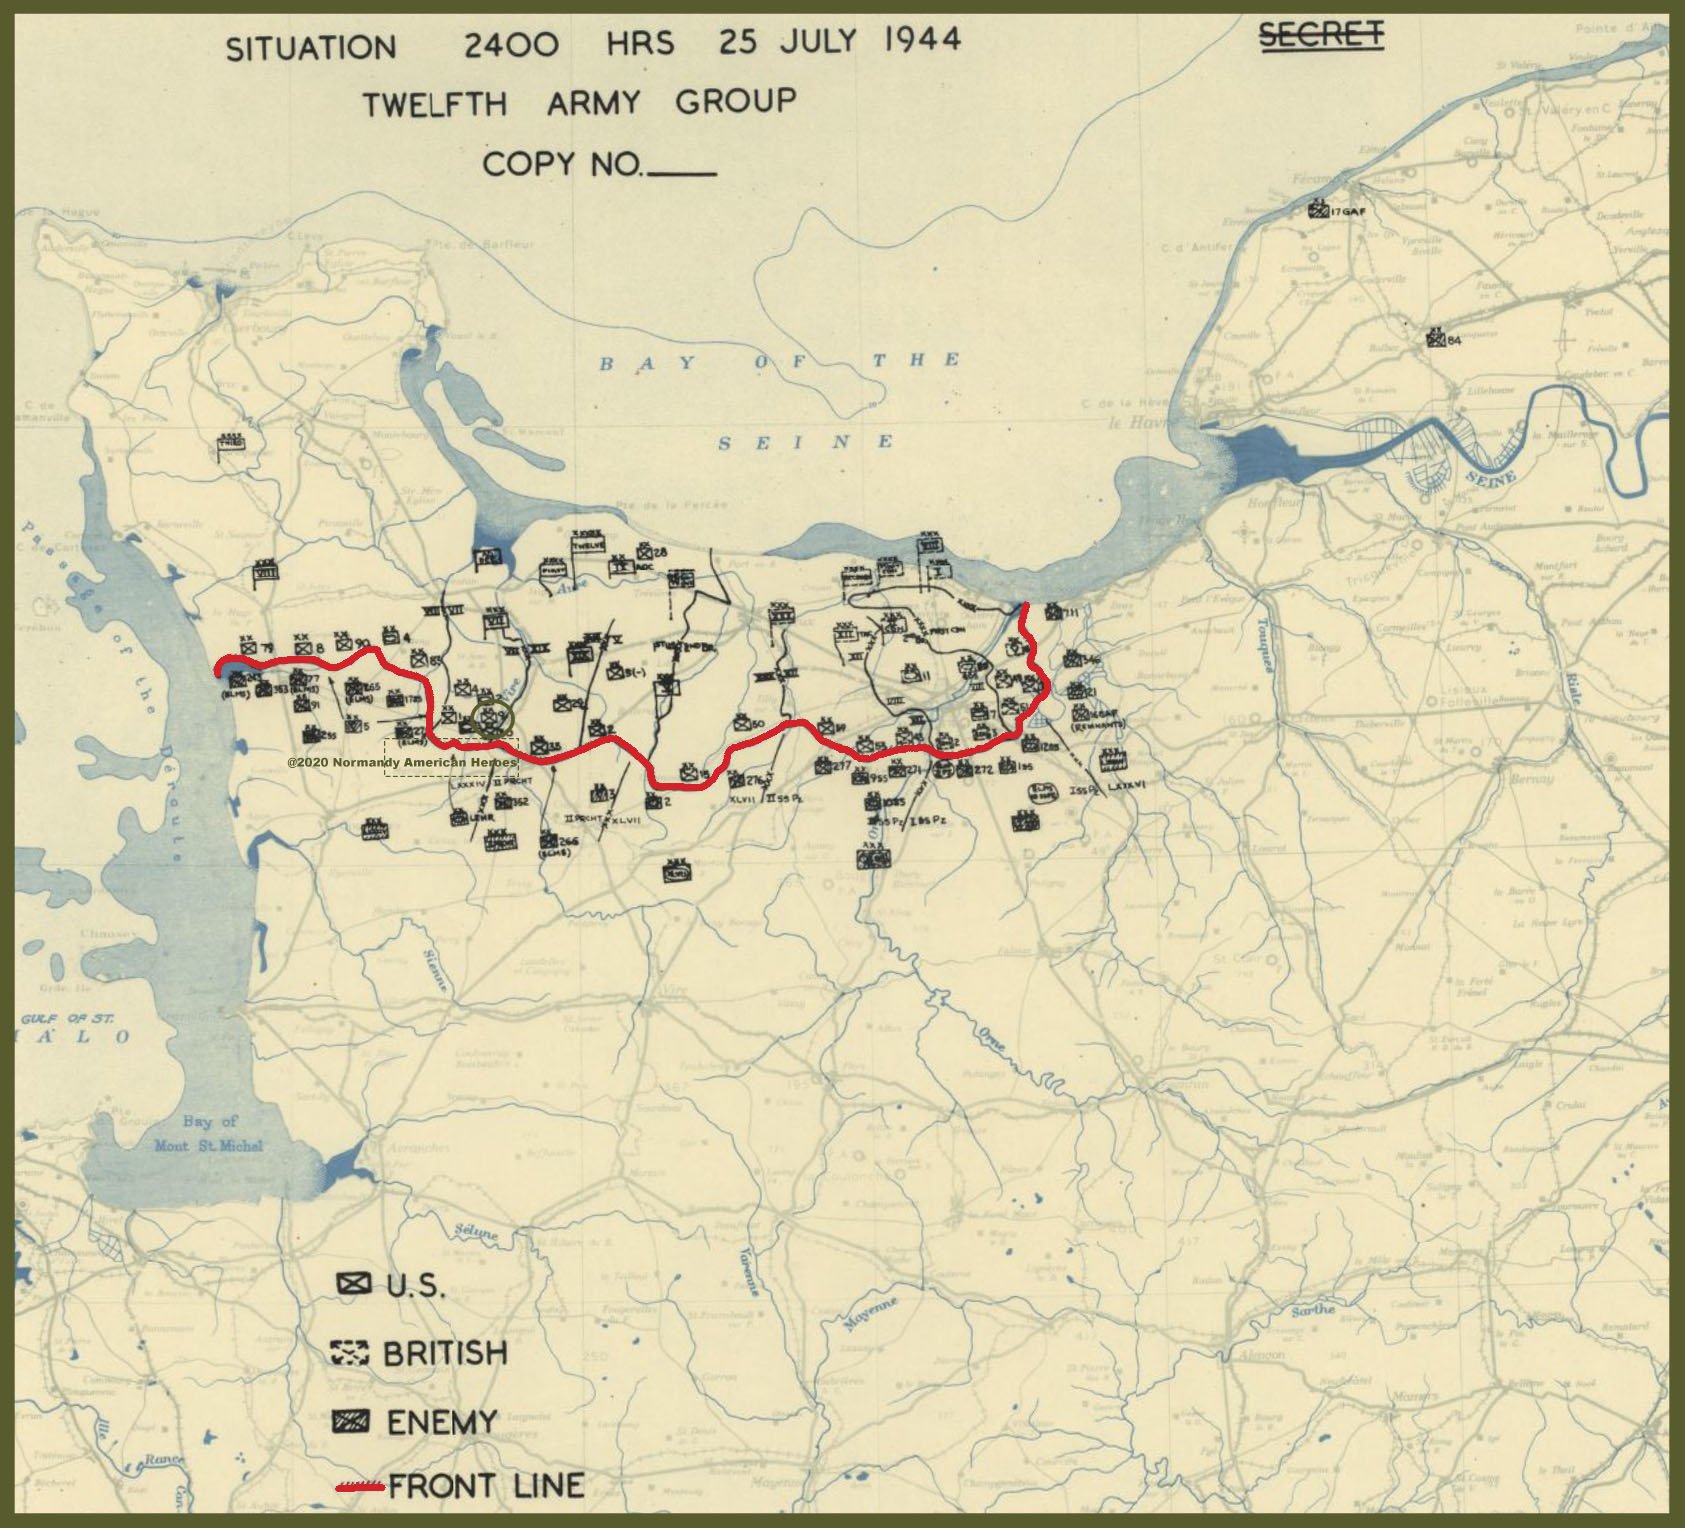 HQ Twelfth Army Group situation map 25 July 1944